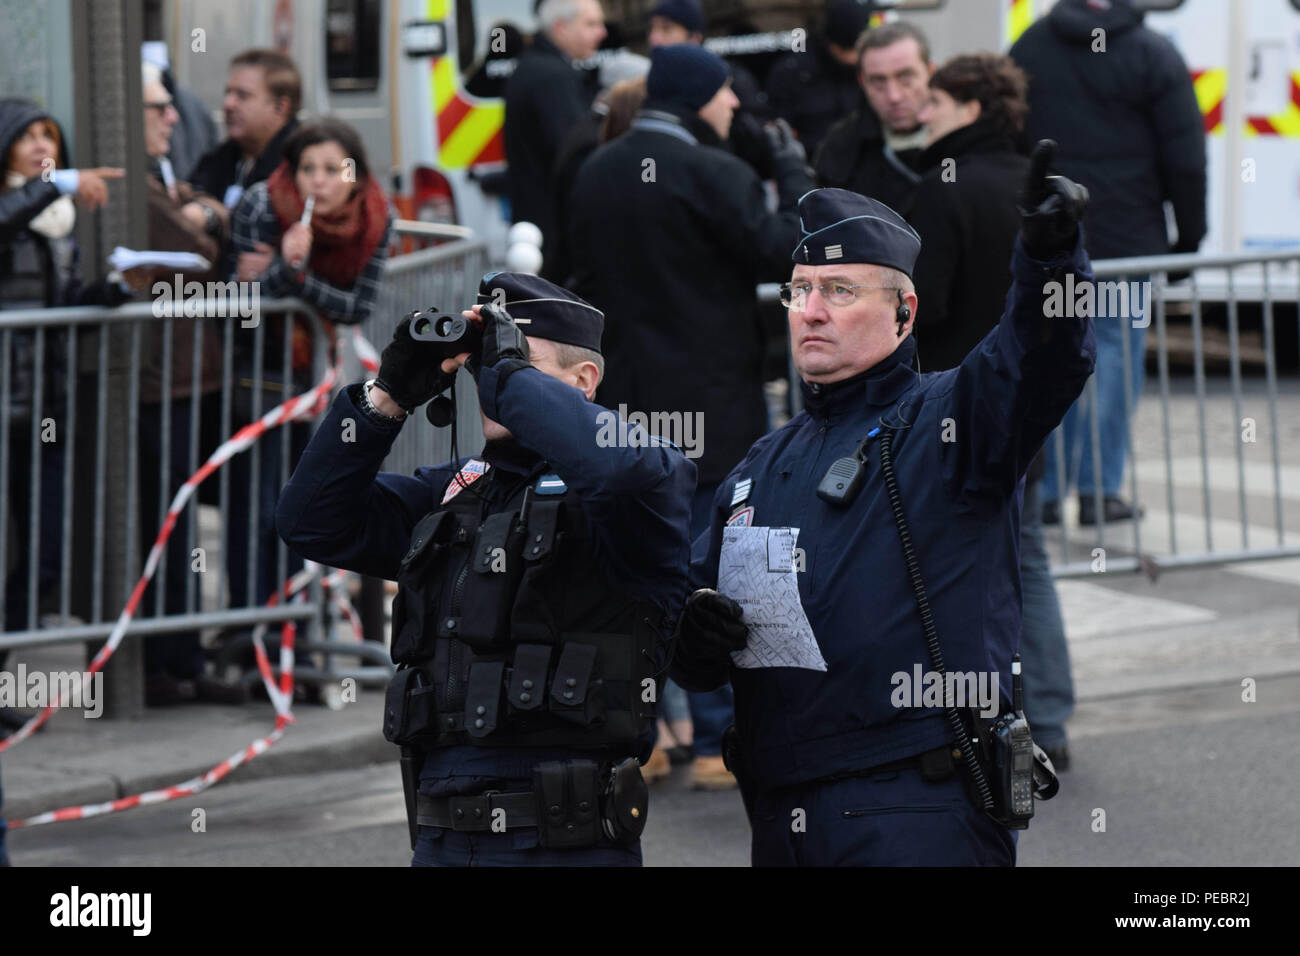 January 11, 2015 - Paris, France:  Police on duty as than 1,5 million people take part in a march to support Freedom of expression and protest against terrorism in the French capital after three days of terror left 17 people dead. Four million people demonstrated across the country in a 'Marche Republicaine' (Republican March) celebrating the nation's unity in face of terrorist threats. Thousands of people had banners or cartoons referring to Charlie Hebdo, the satirical magazine whose office was targeted by Islamist gunmen earlier in the week. La grande marche republicaine en hommage aux vict Stock Photo